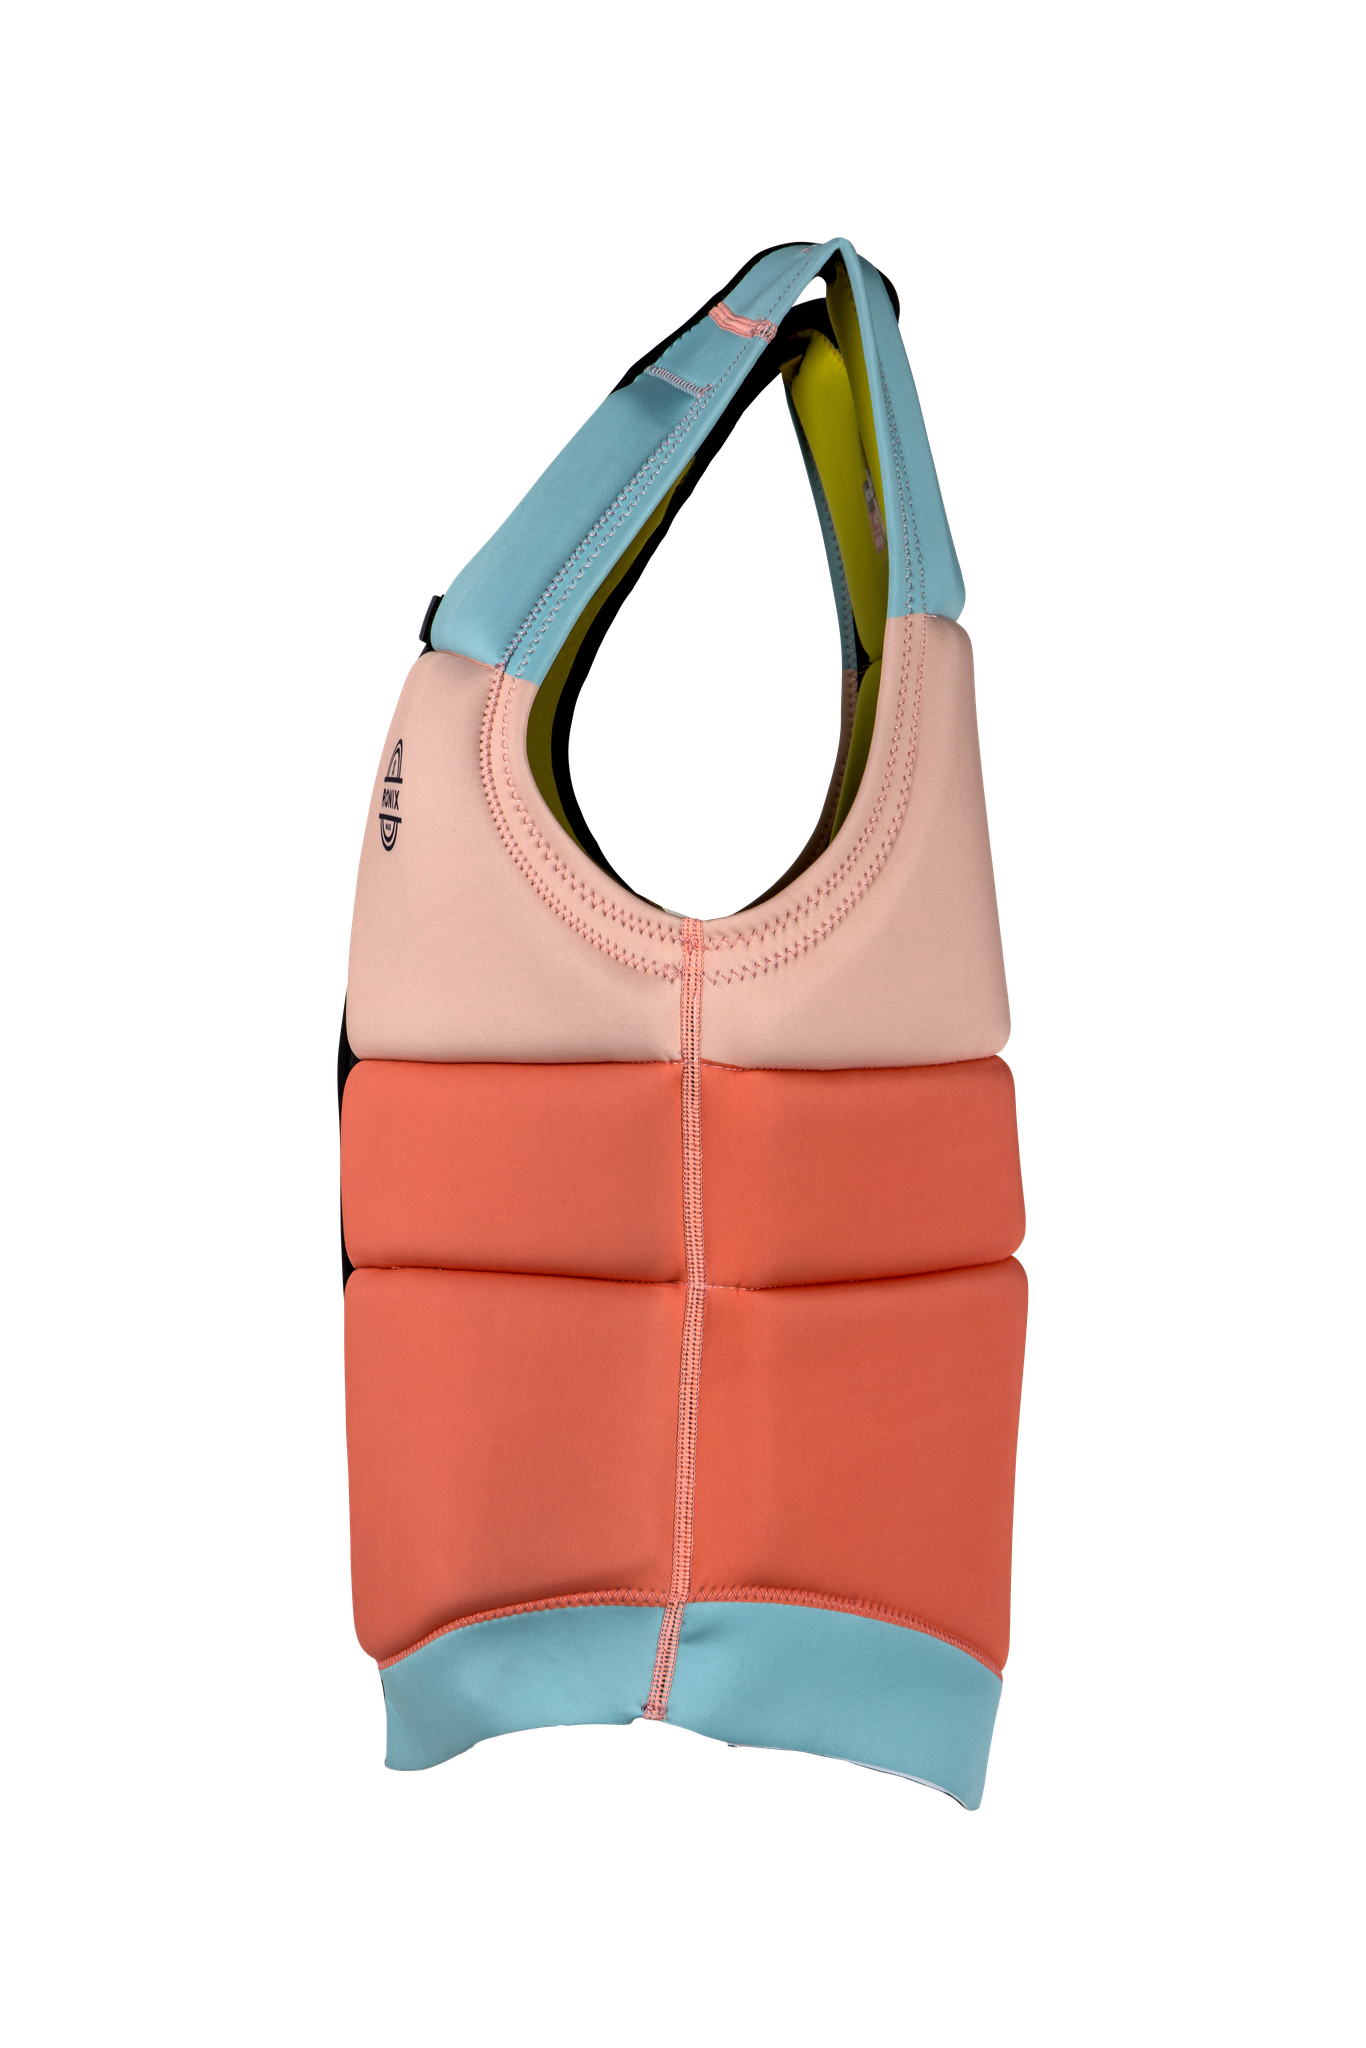 A Ronix 2023 Coral Women's CE Impact Vest with a pink, blue, and yellow design. The vest is made with flex foam construction and meets CE approved standards for safety. It serves as both a stylish accessory.